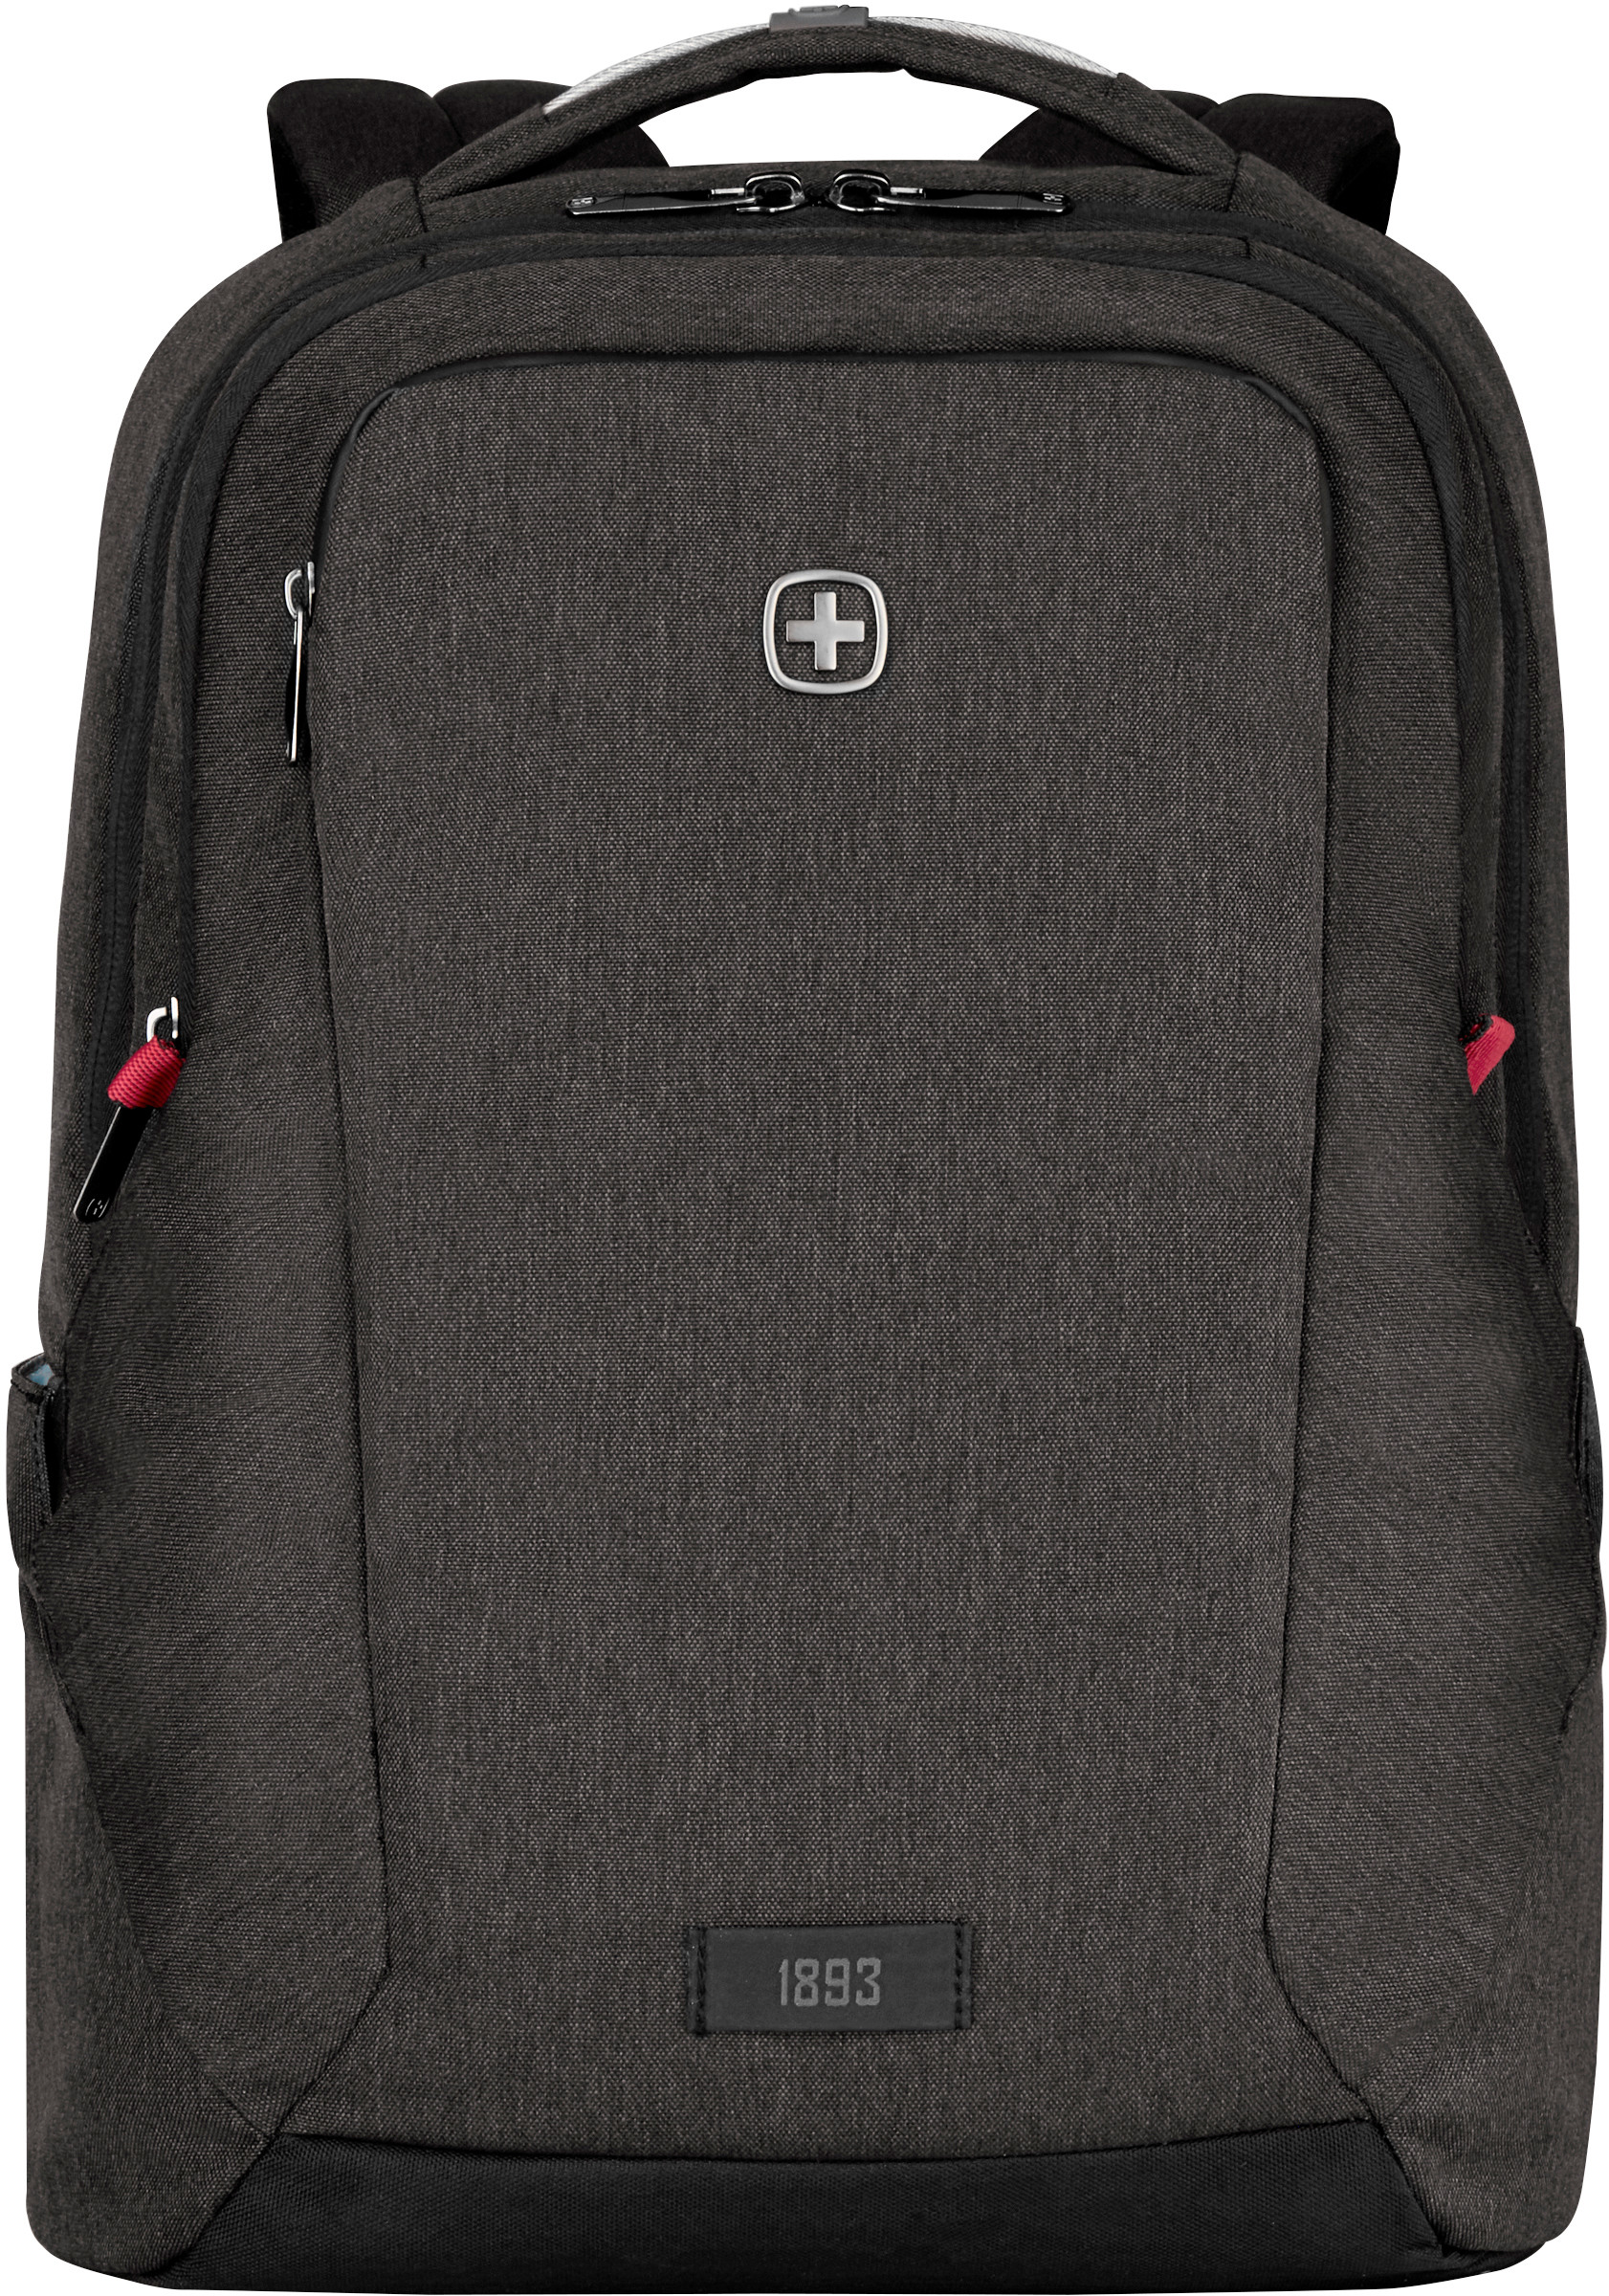 WENGER MX Professional 16 inch 611641 Laptop Backpack